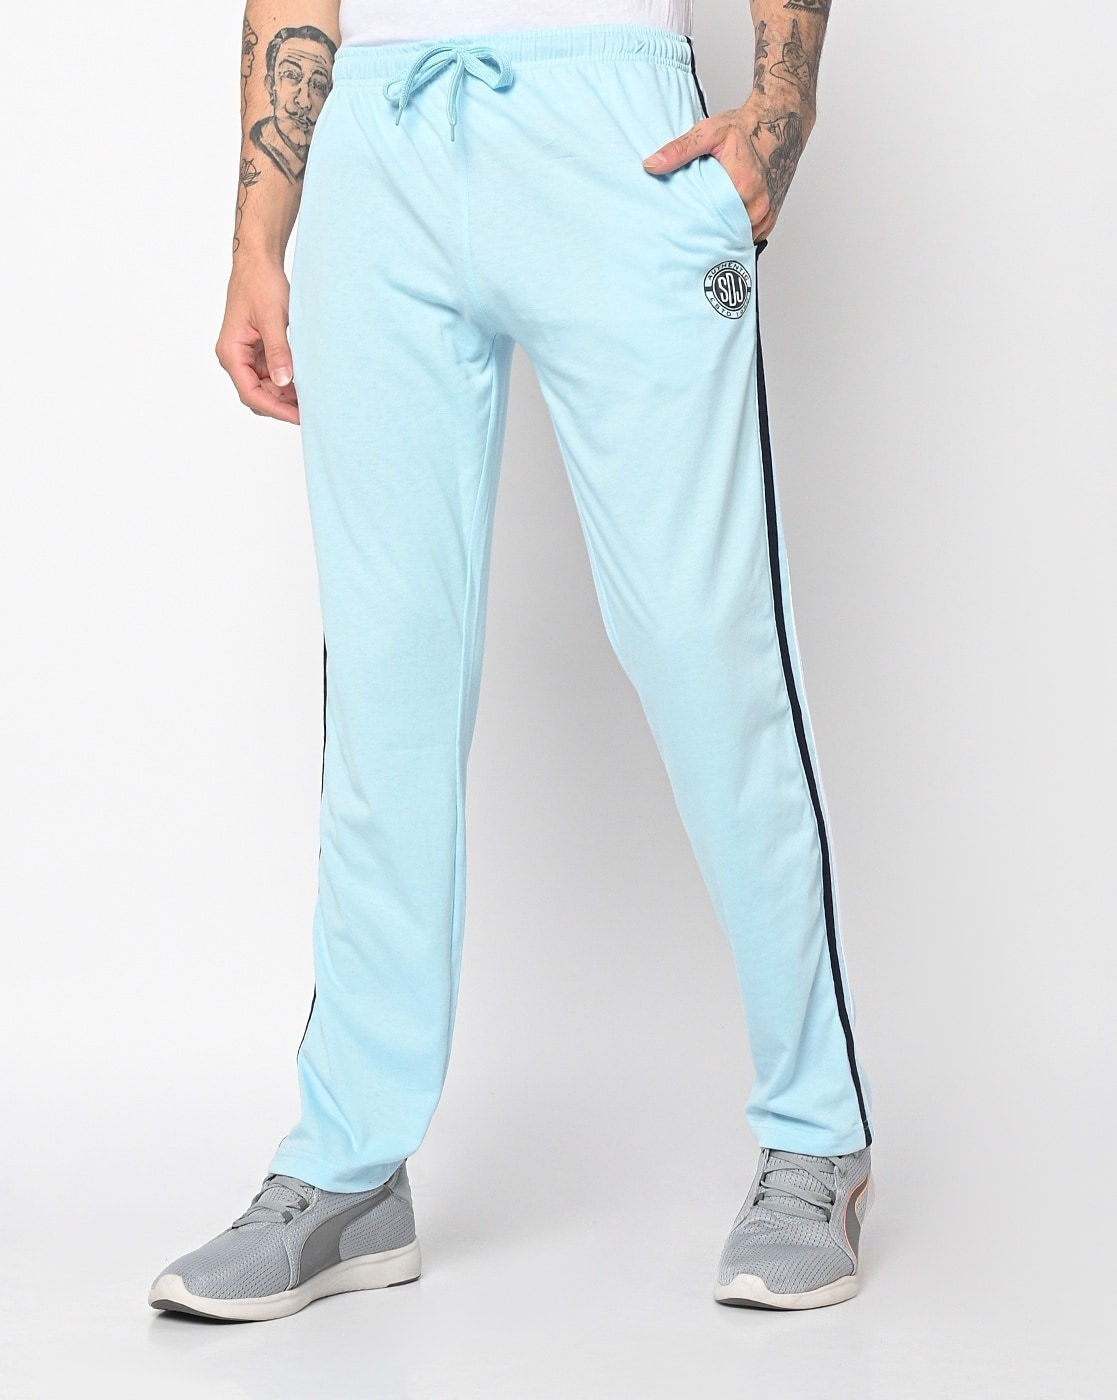 Beevee solid sky blue cotton track pant - G3-MTP0546 | G3fashion.com